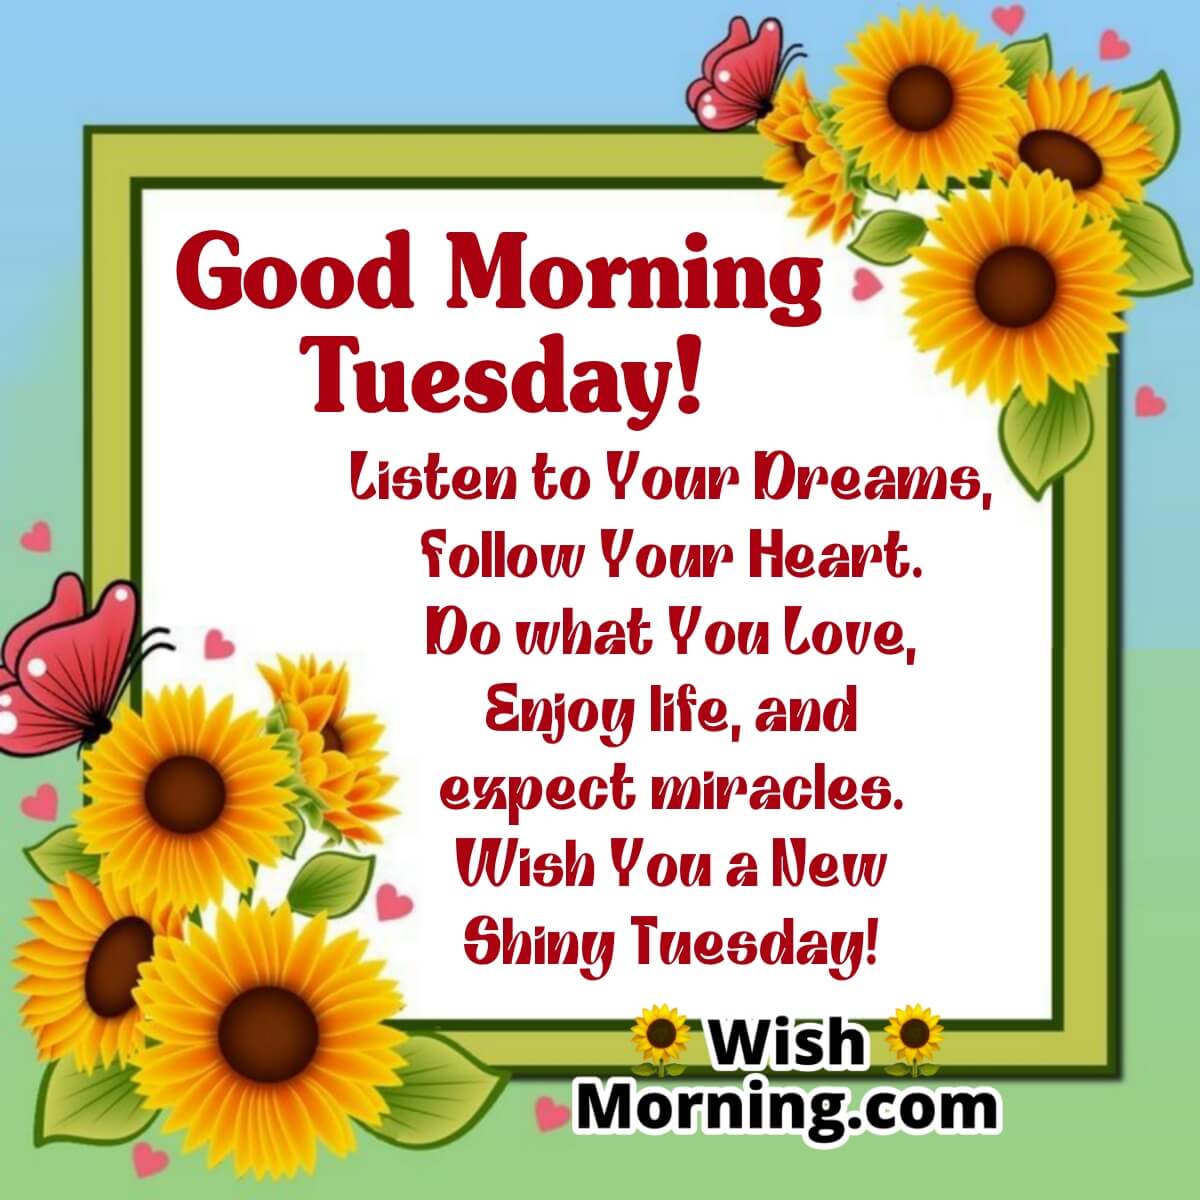 Good Morning Tuesday Wishes